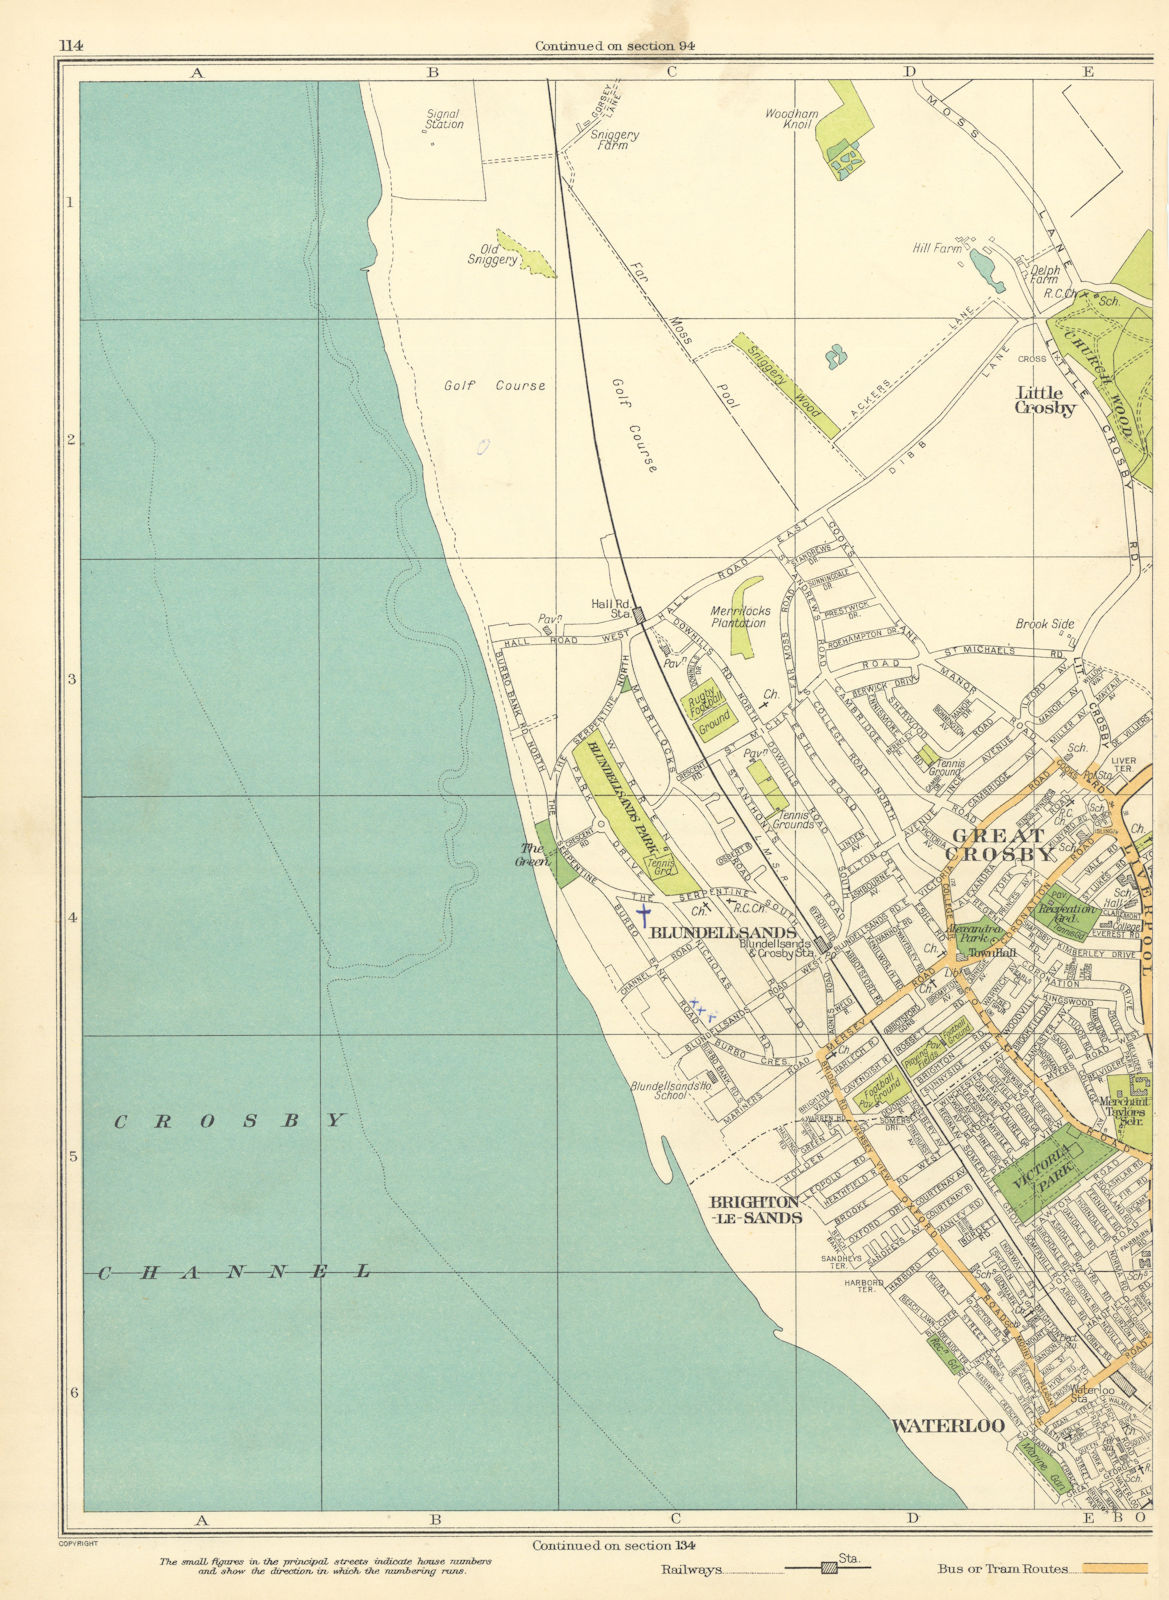 LIVERPOOL Great Crosby Blundellsands Waterloo Little Brighton-le-Sands 1935 map